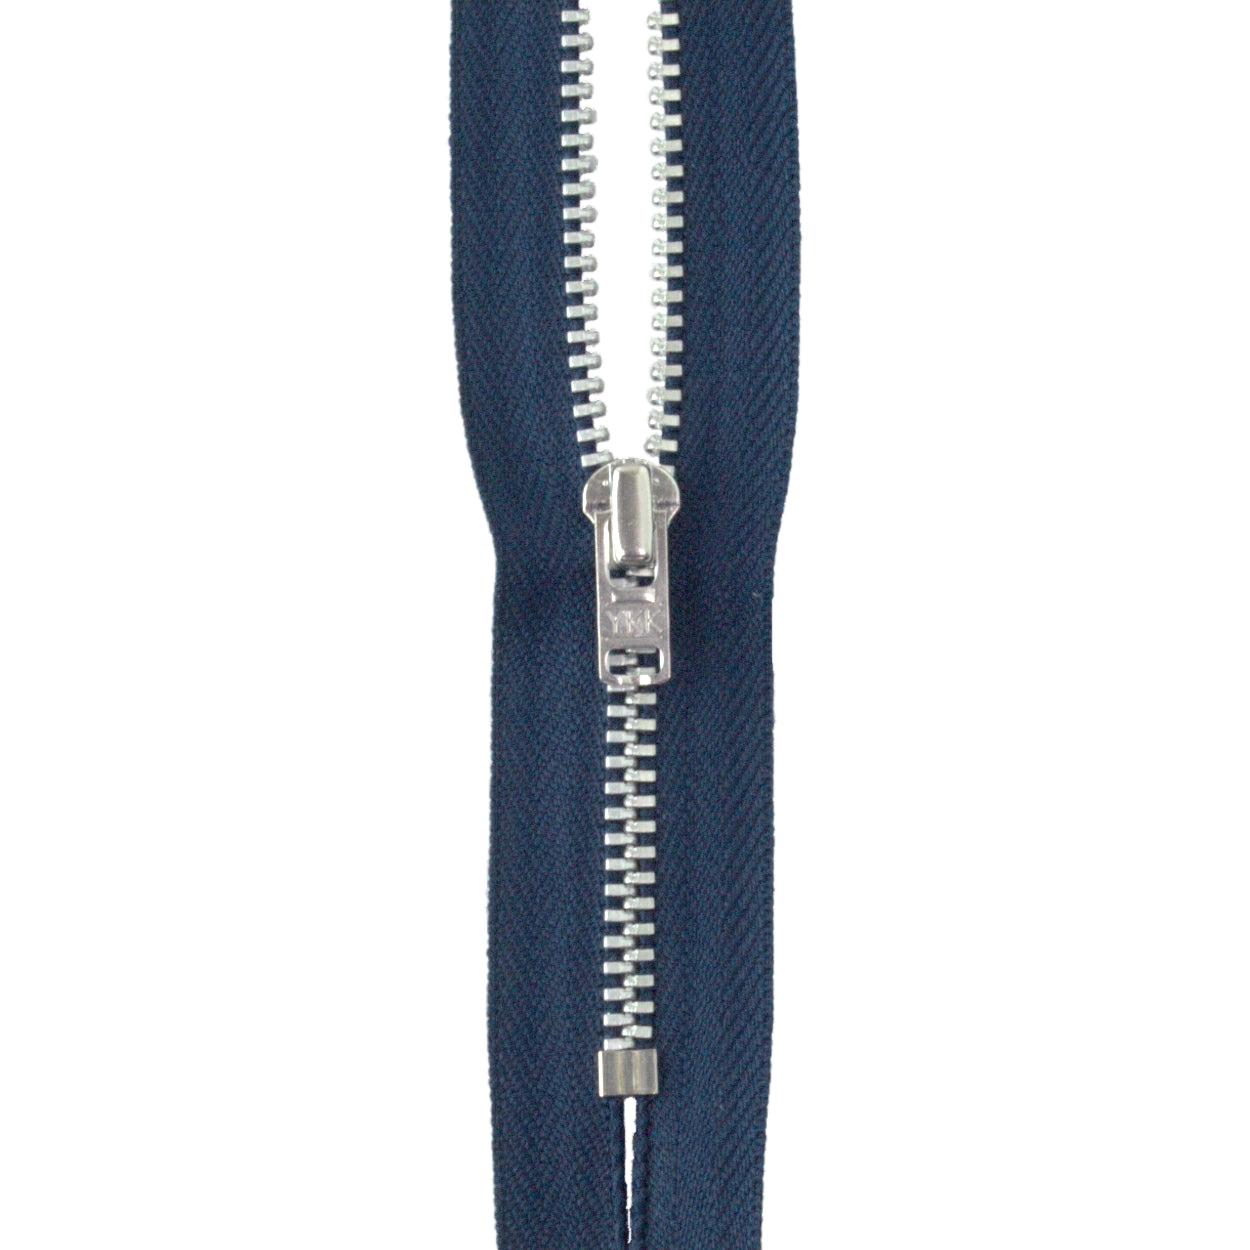 YKK silver tooth Metal Dress Zips - Navy from Jaycotts Sewing Supplies